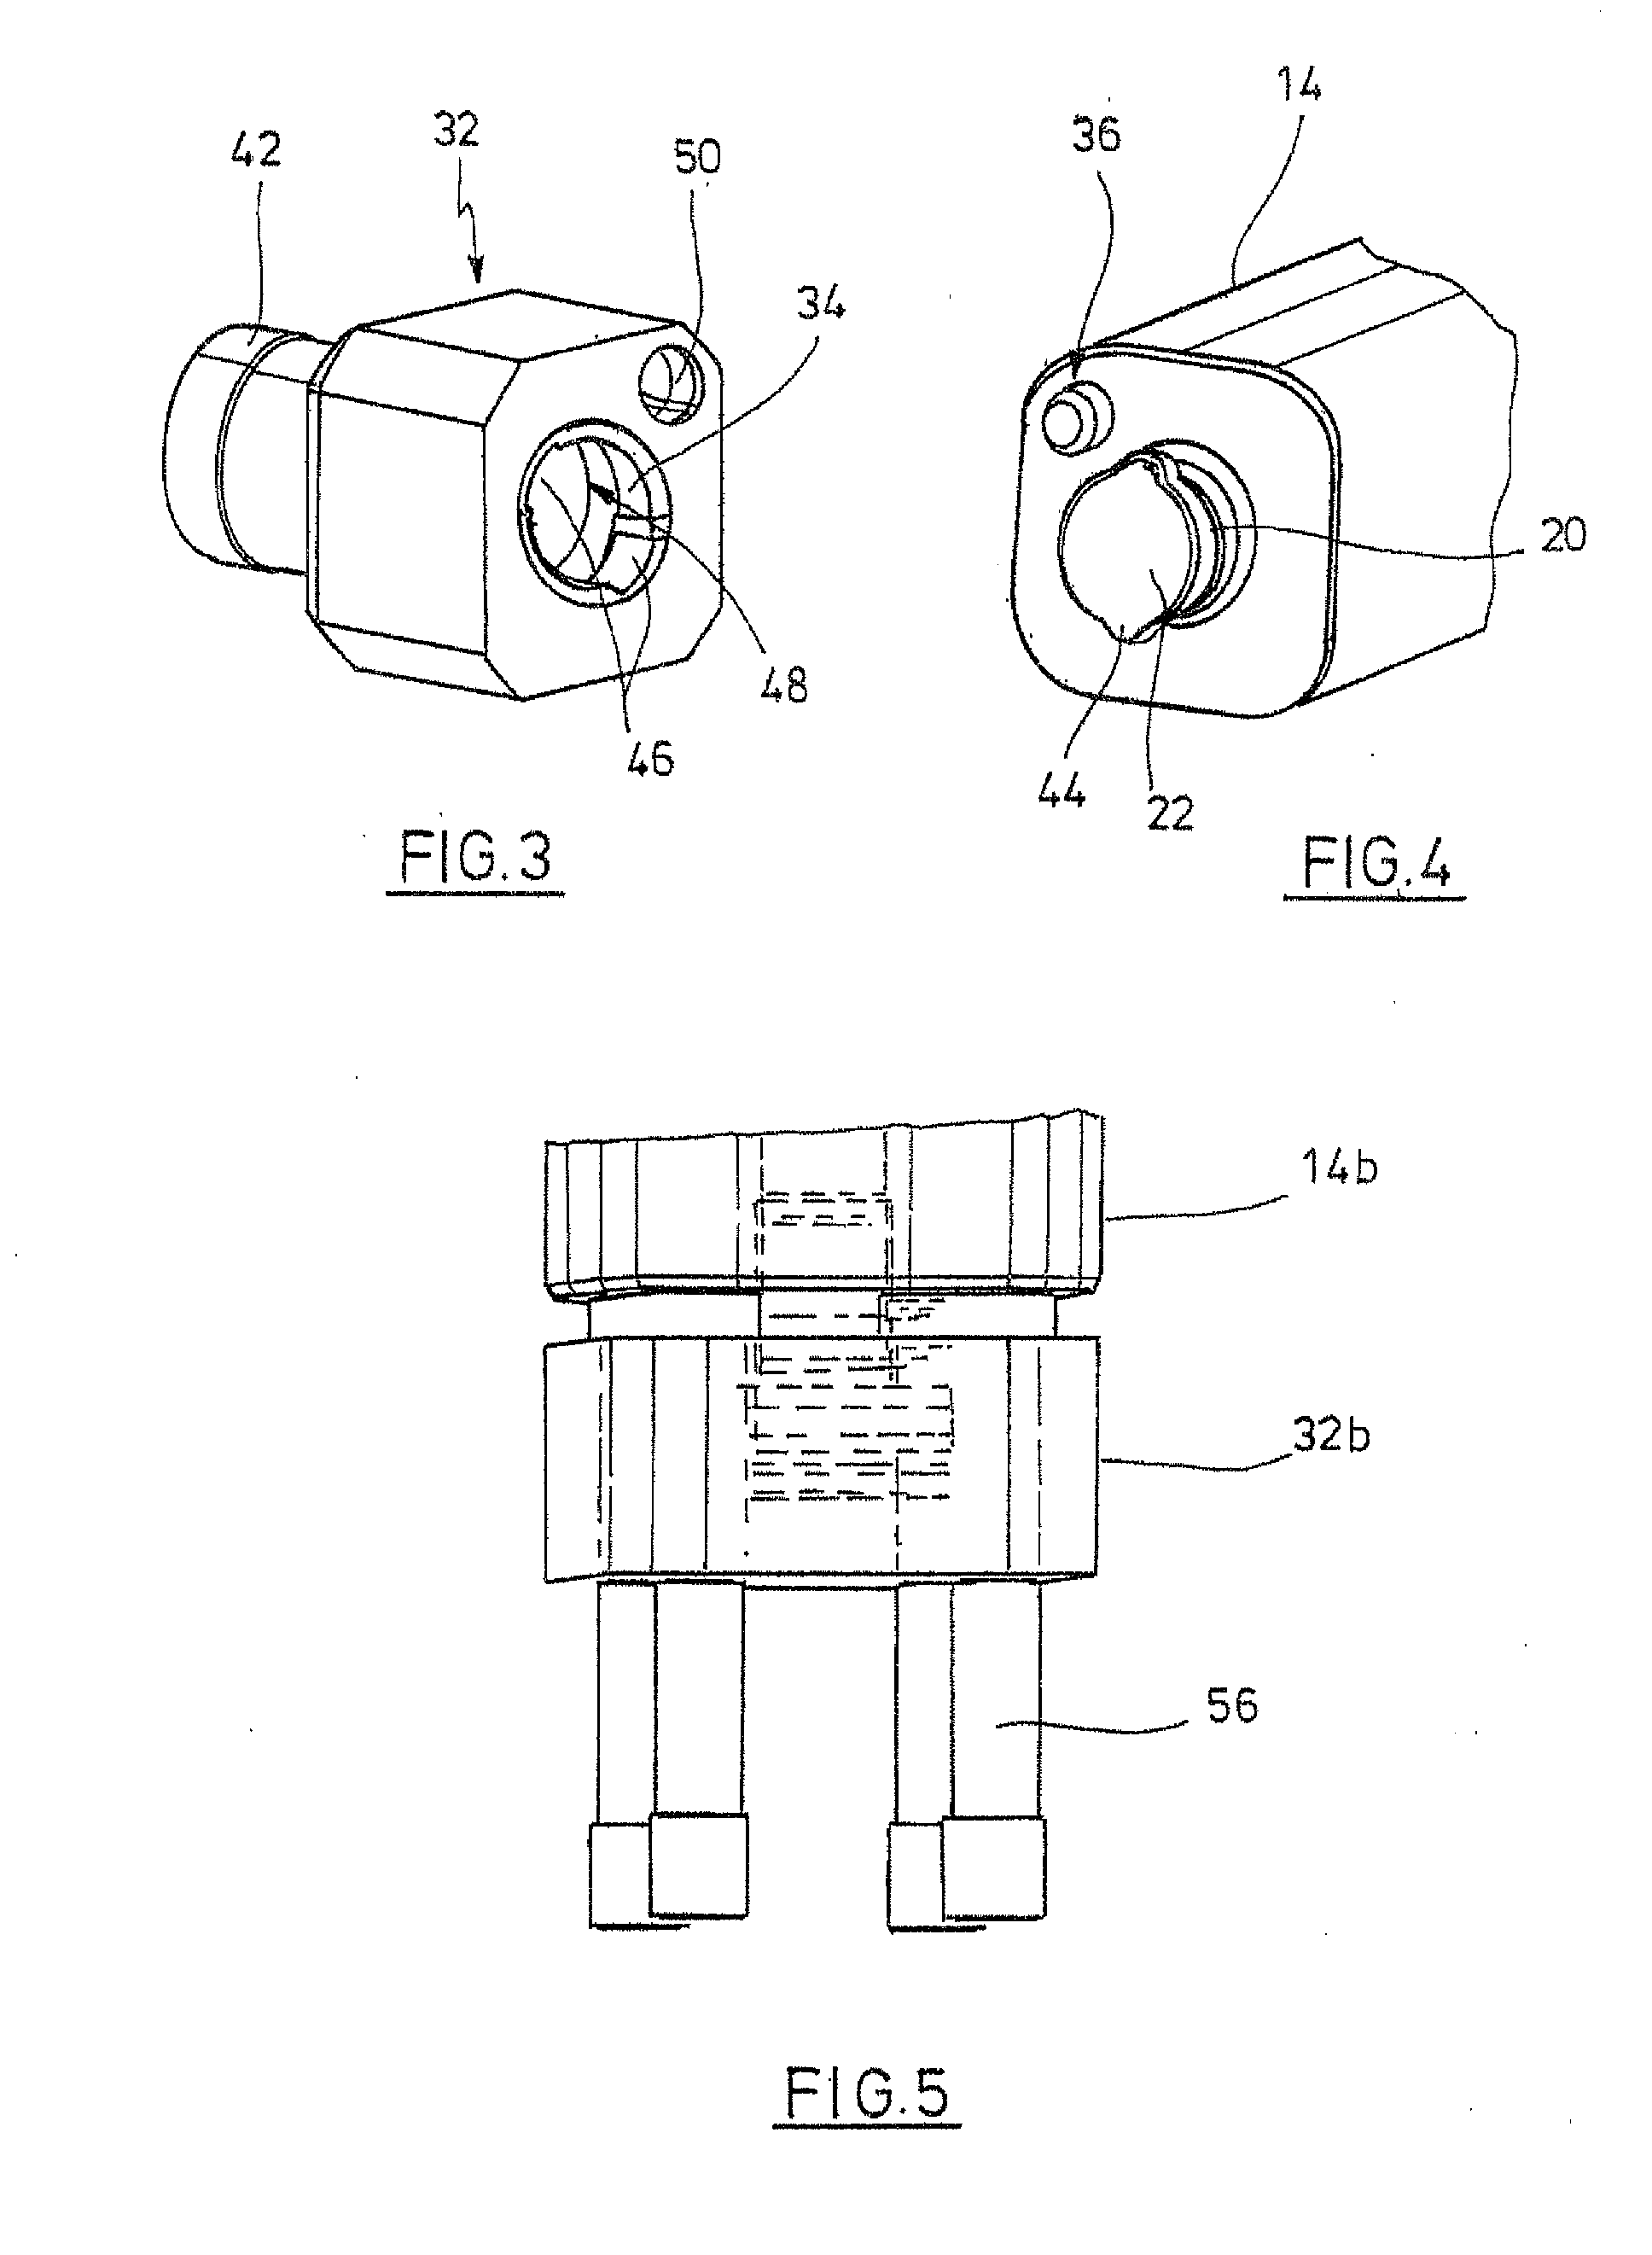 Punch for a rotary press